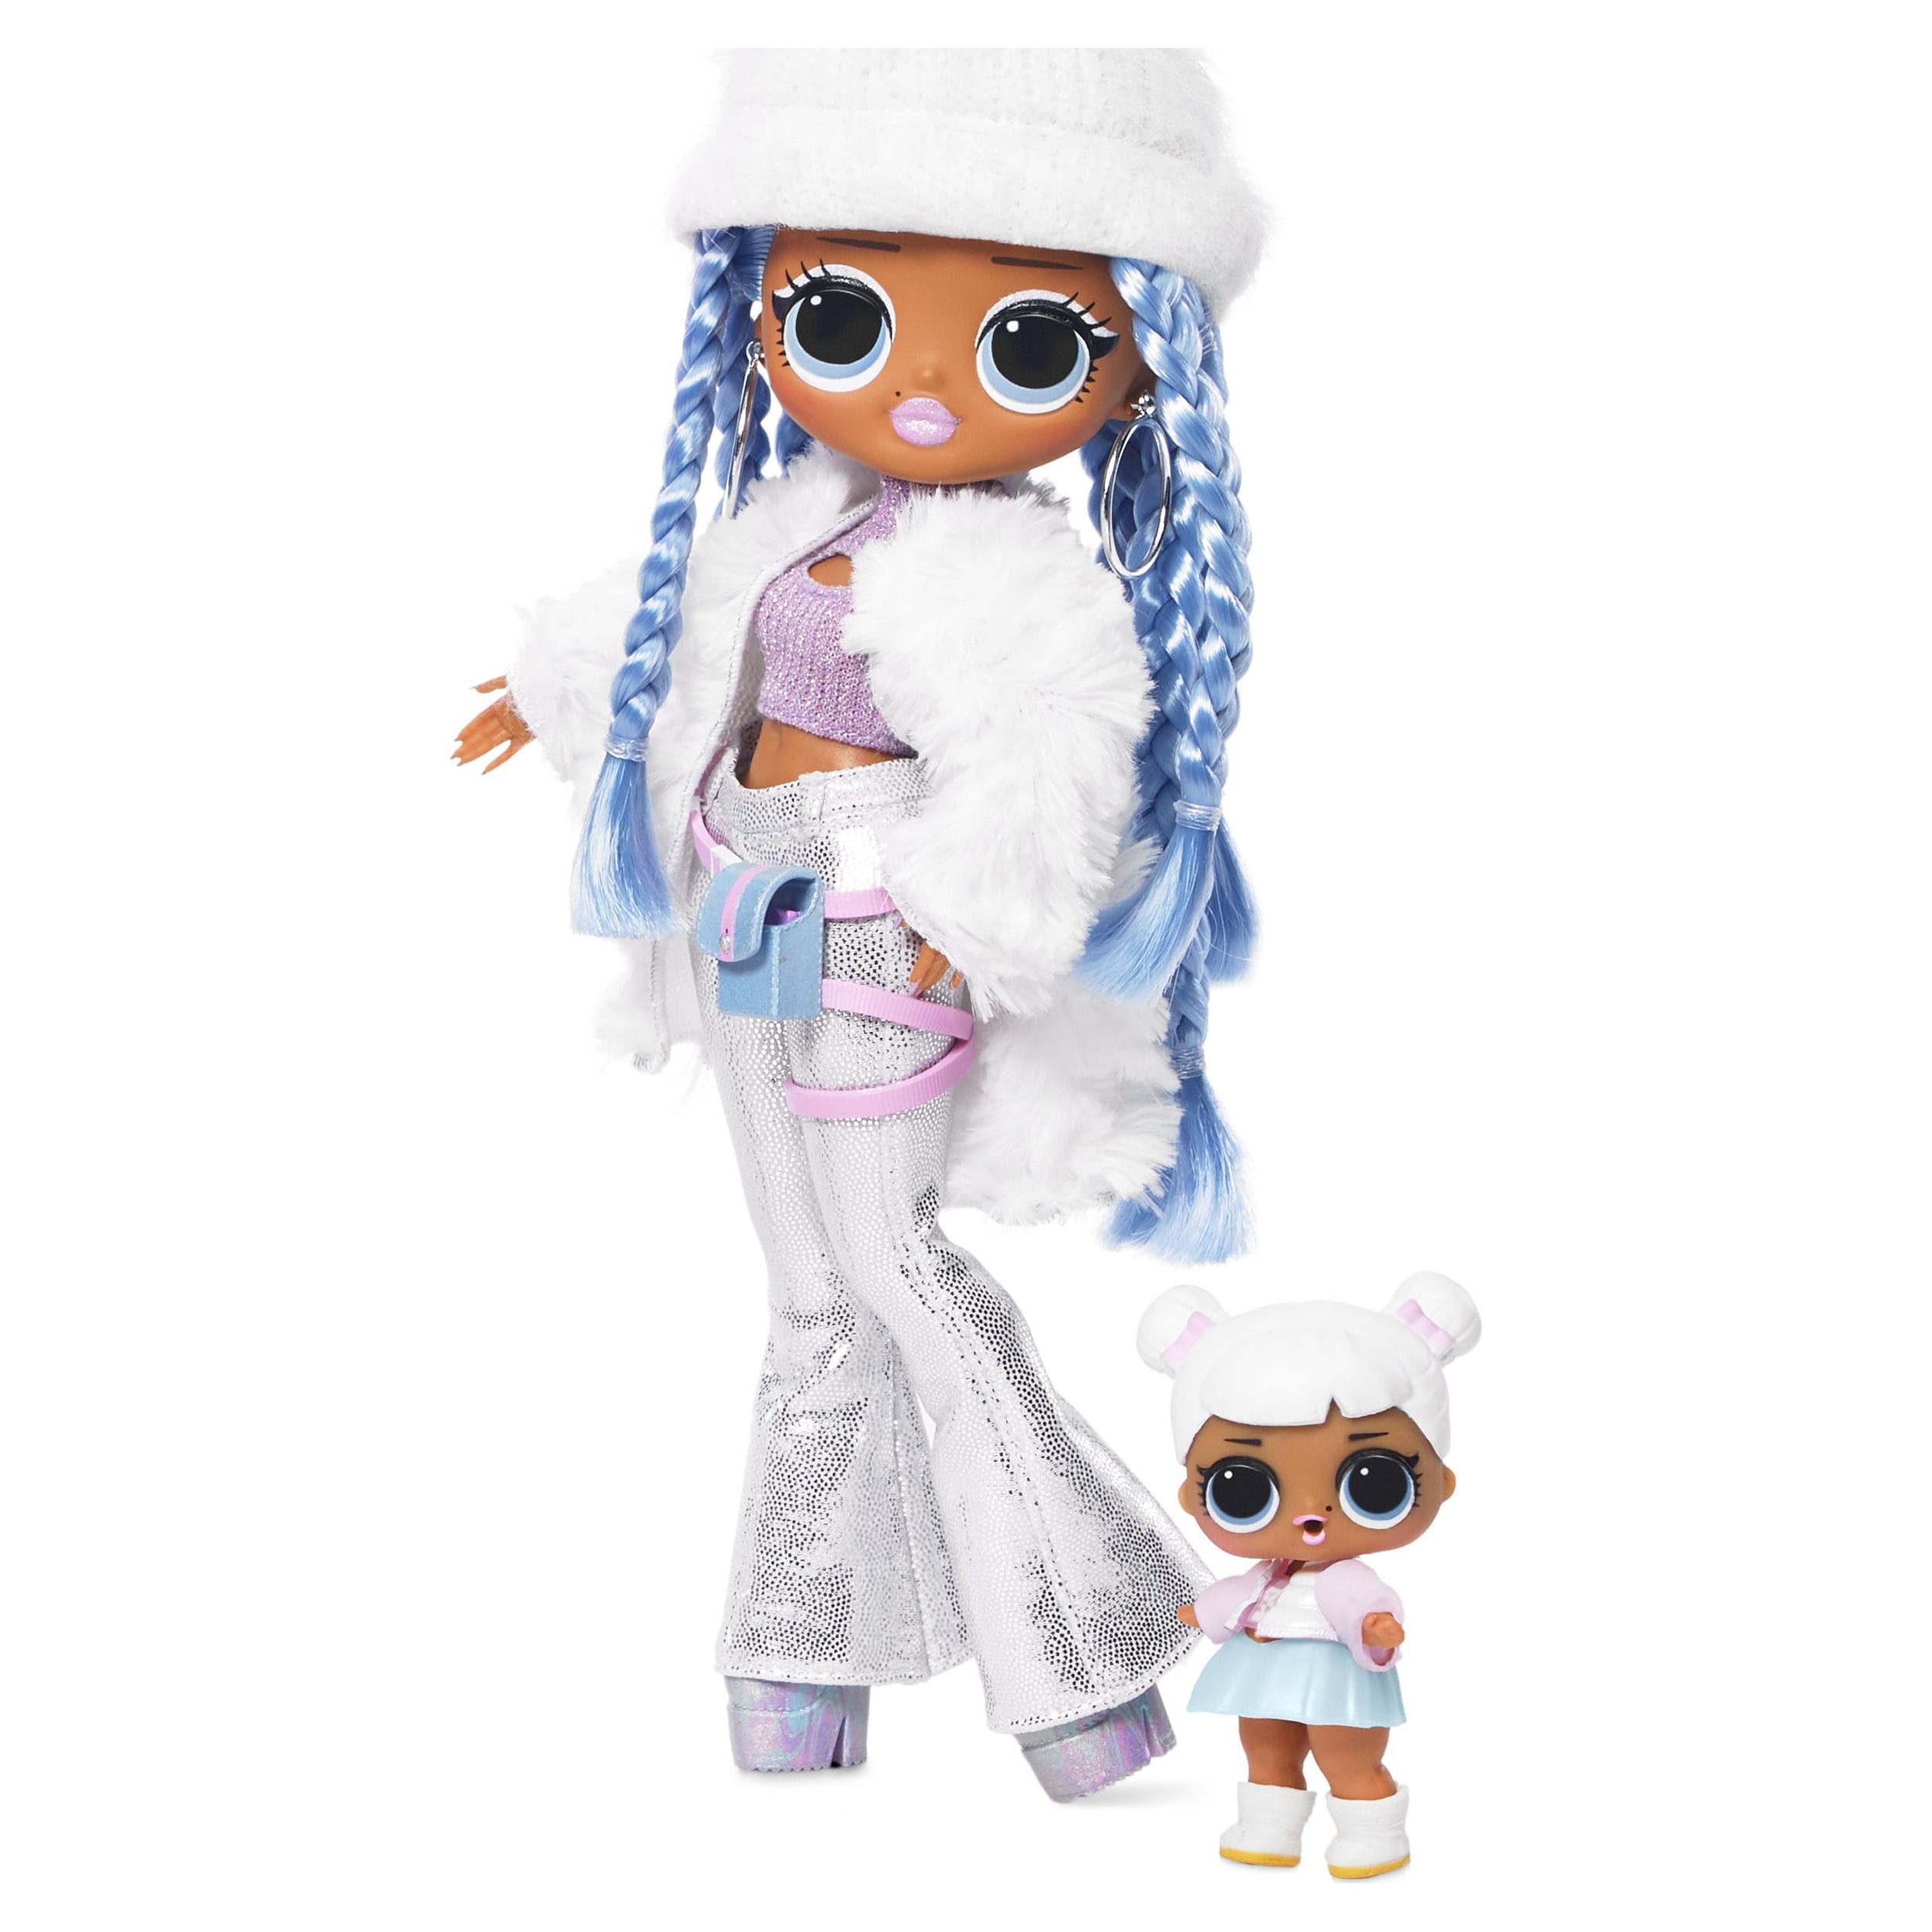 LOL Surprise OMG Winter Disco Snowlicious Fashion Doll & Sister, Great Gift for Kids Ages 4 5 6+ - image 1 of 7